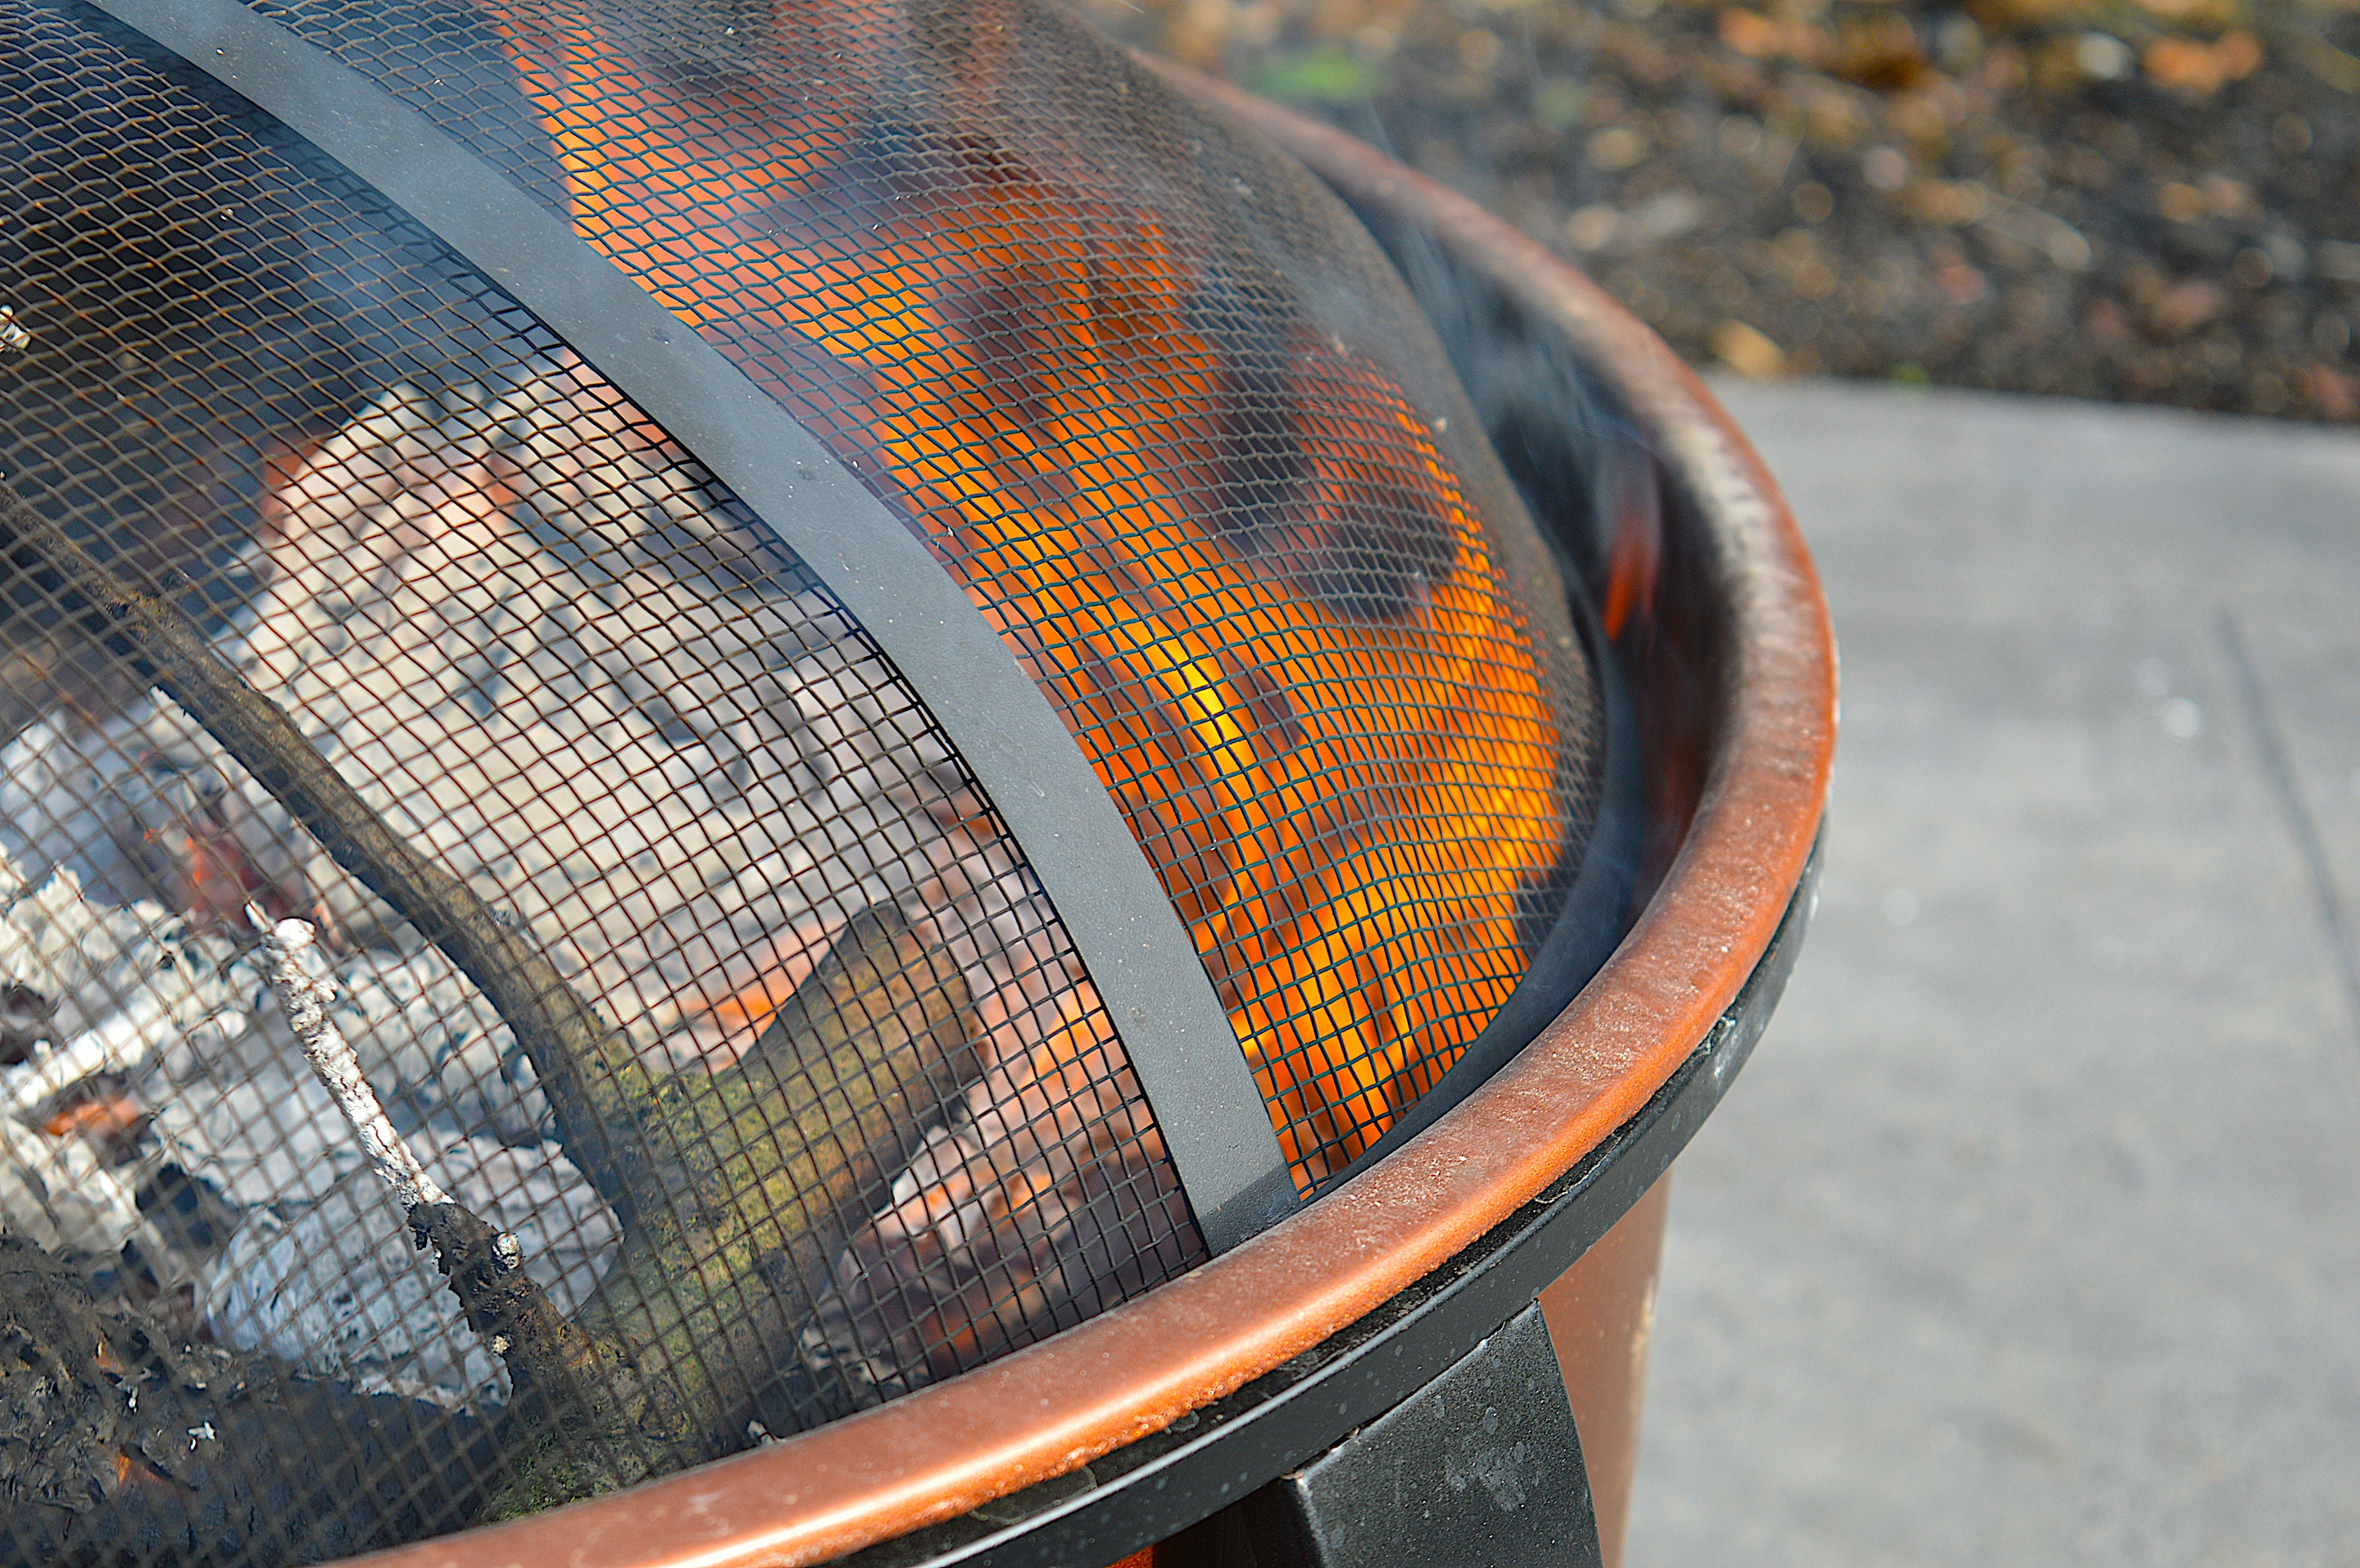 a fire pit in a backyard, covered by a mesh wire screen